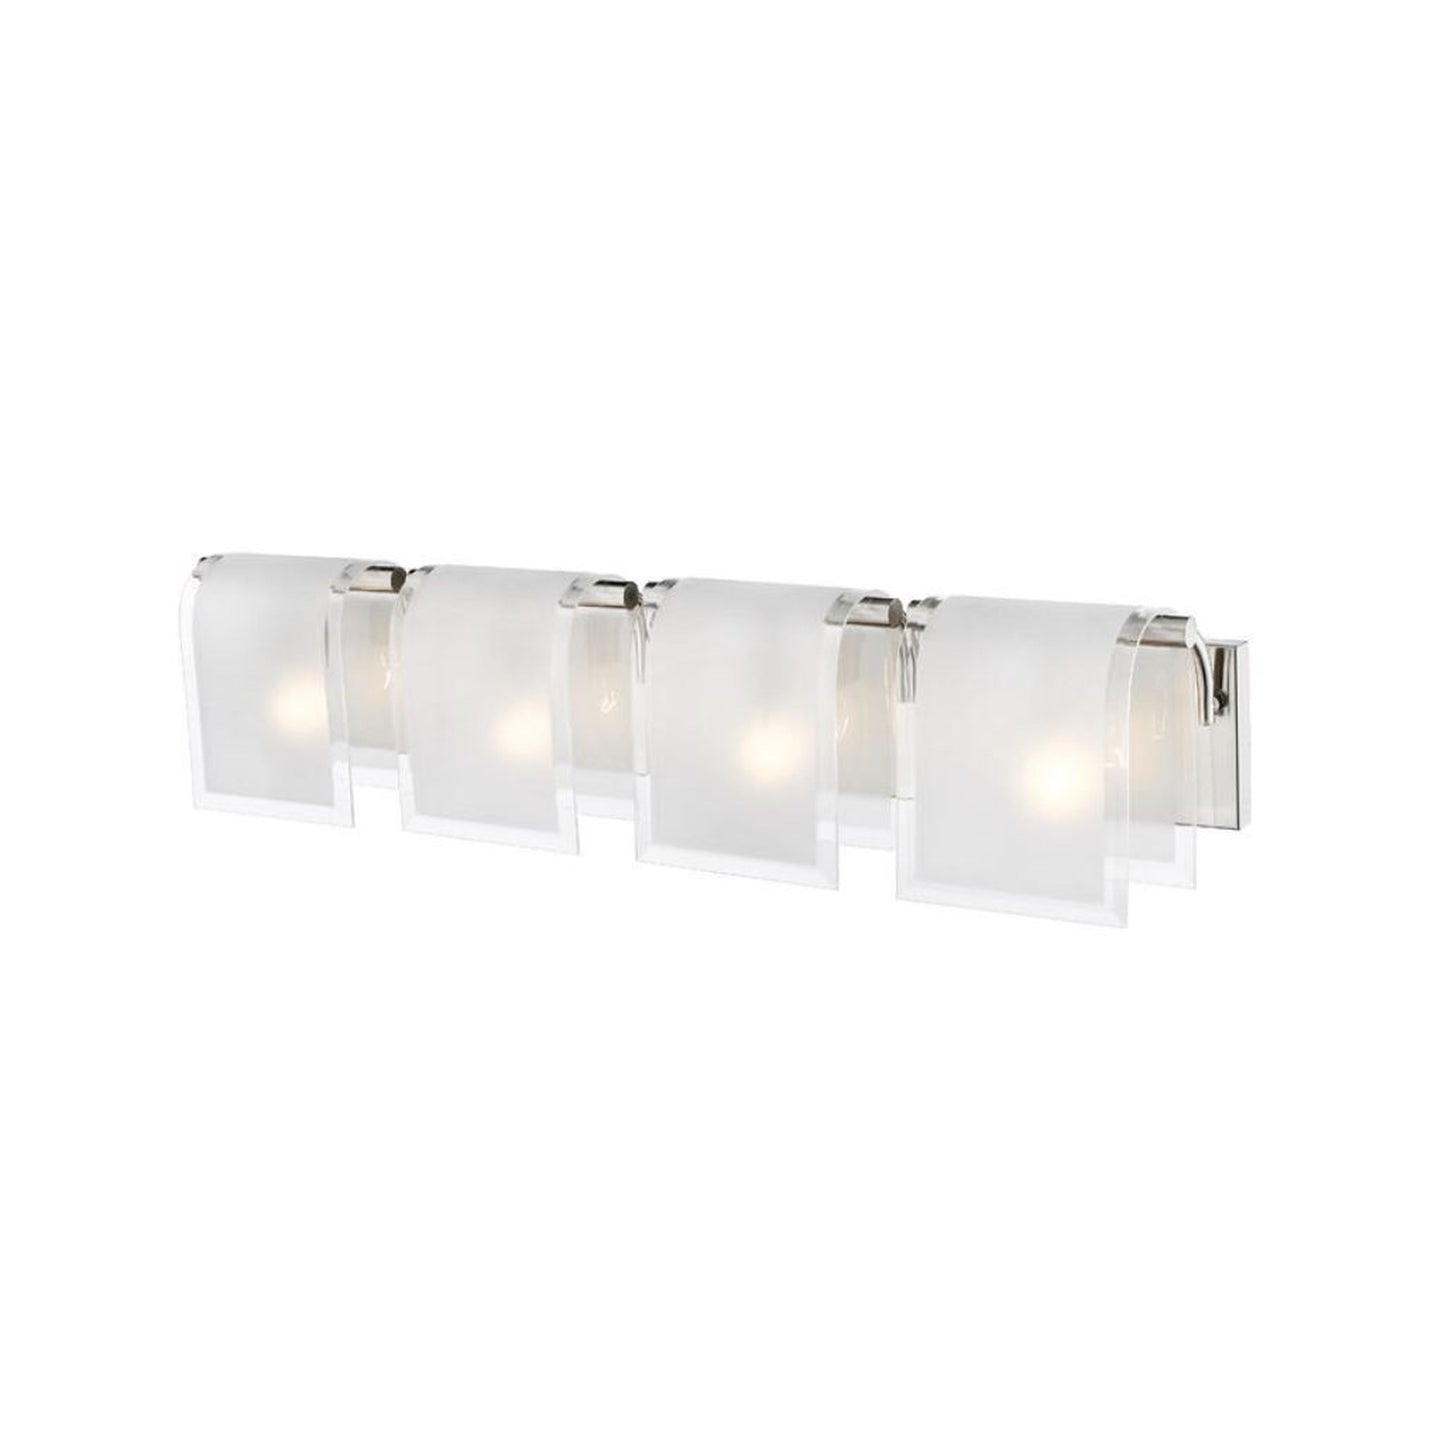 Z-Lite Zephyr 31" 4-Light Brushed Nickel Vanity Light With Clear Beveled and Frosted Glass Shade